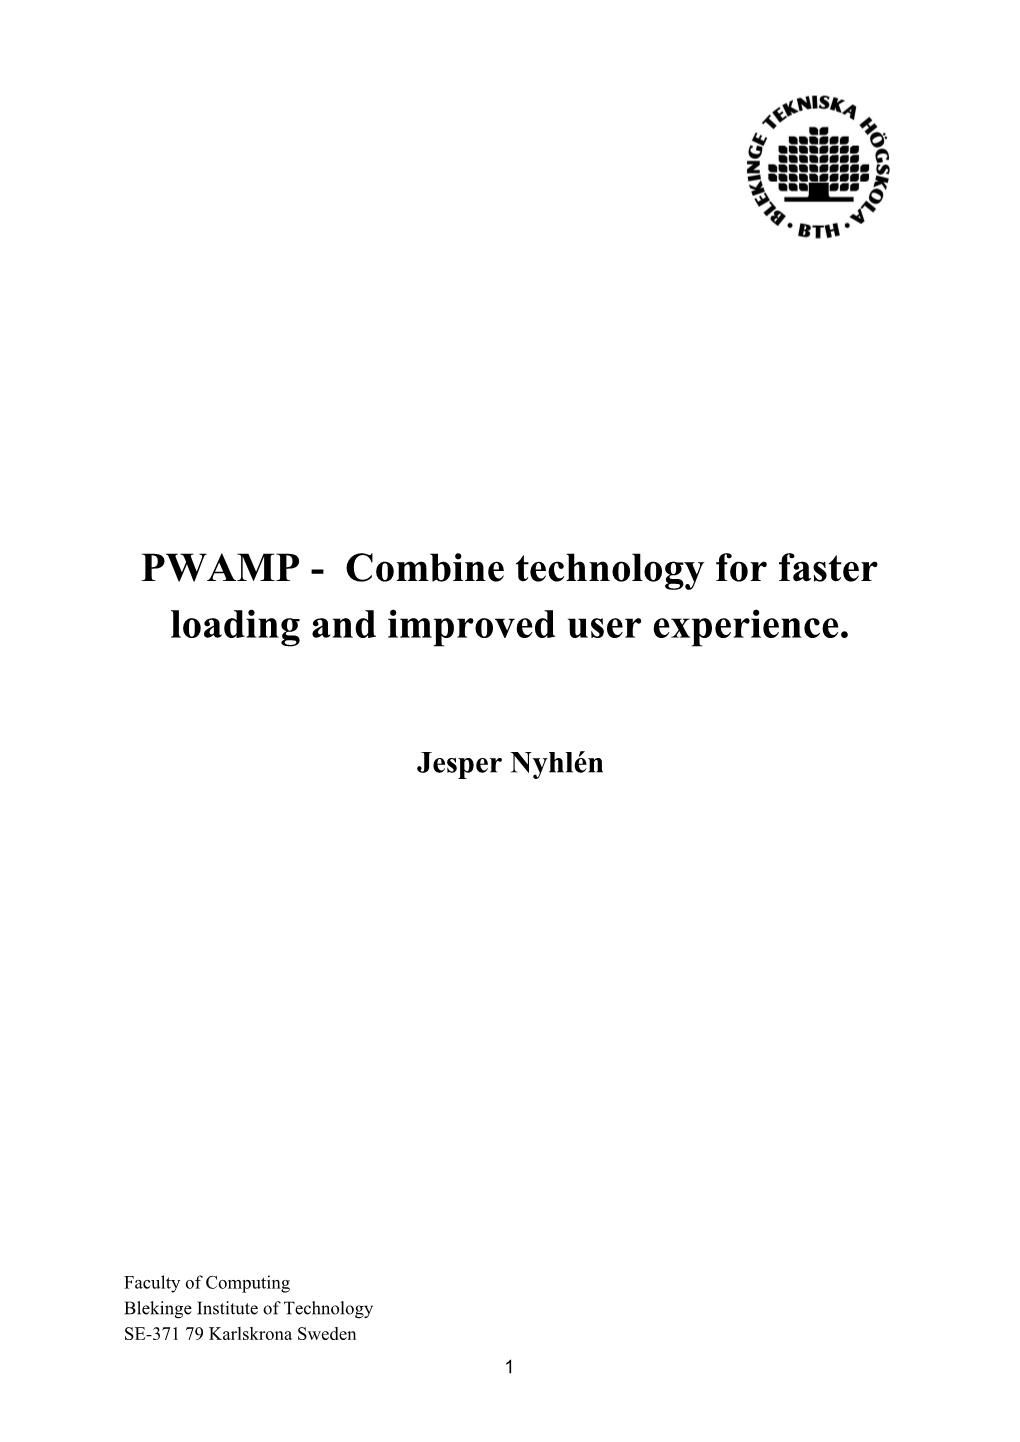 PWAMP - Combine Technology for Faster Loading and Improved User Experience